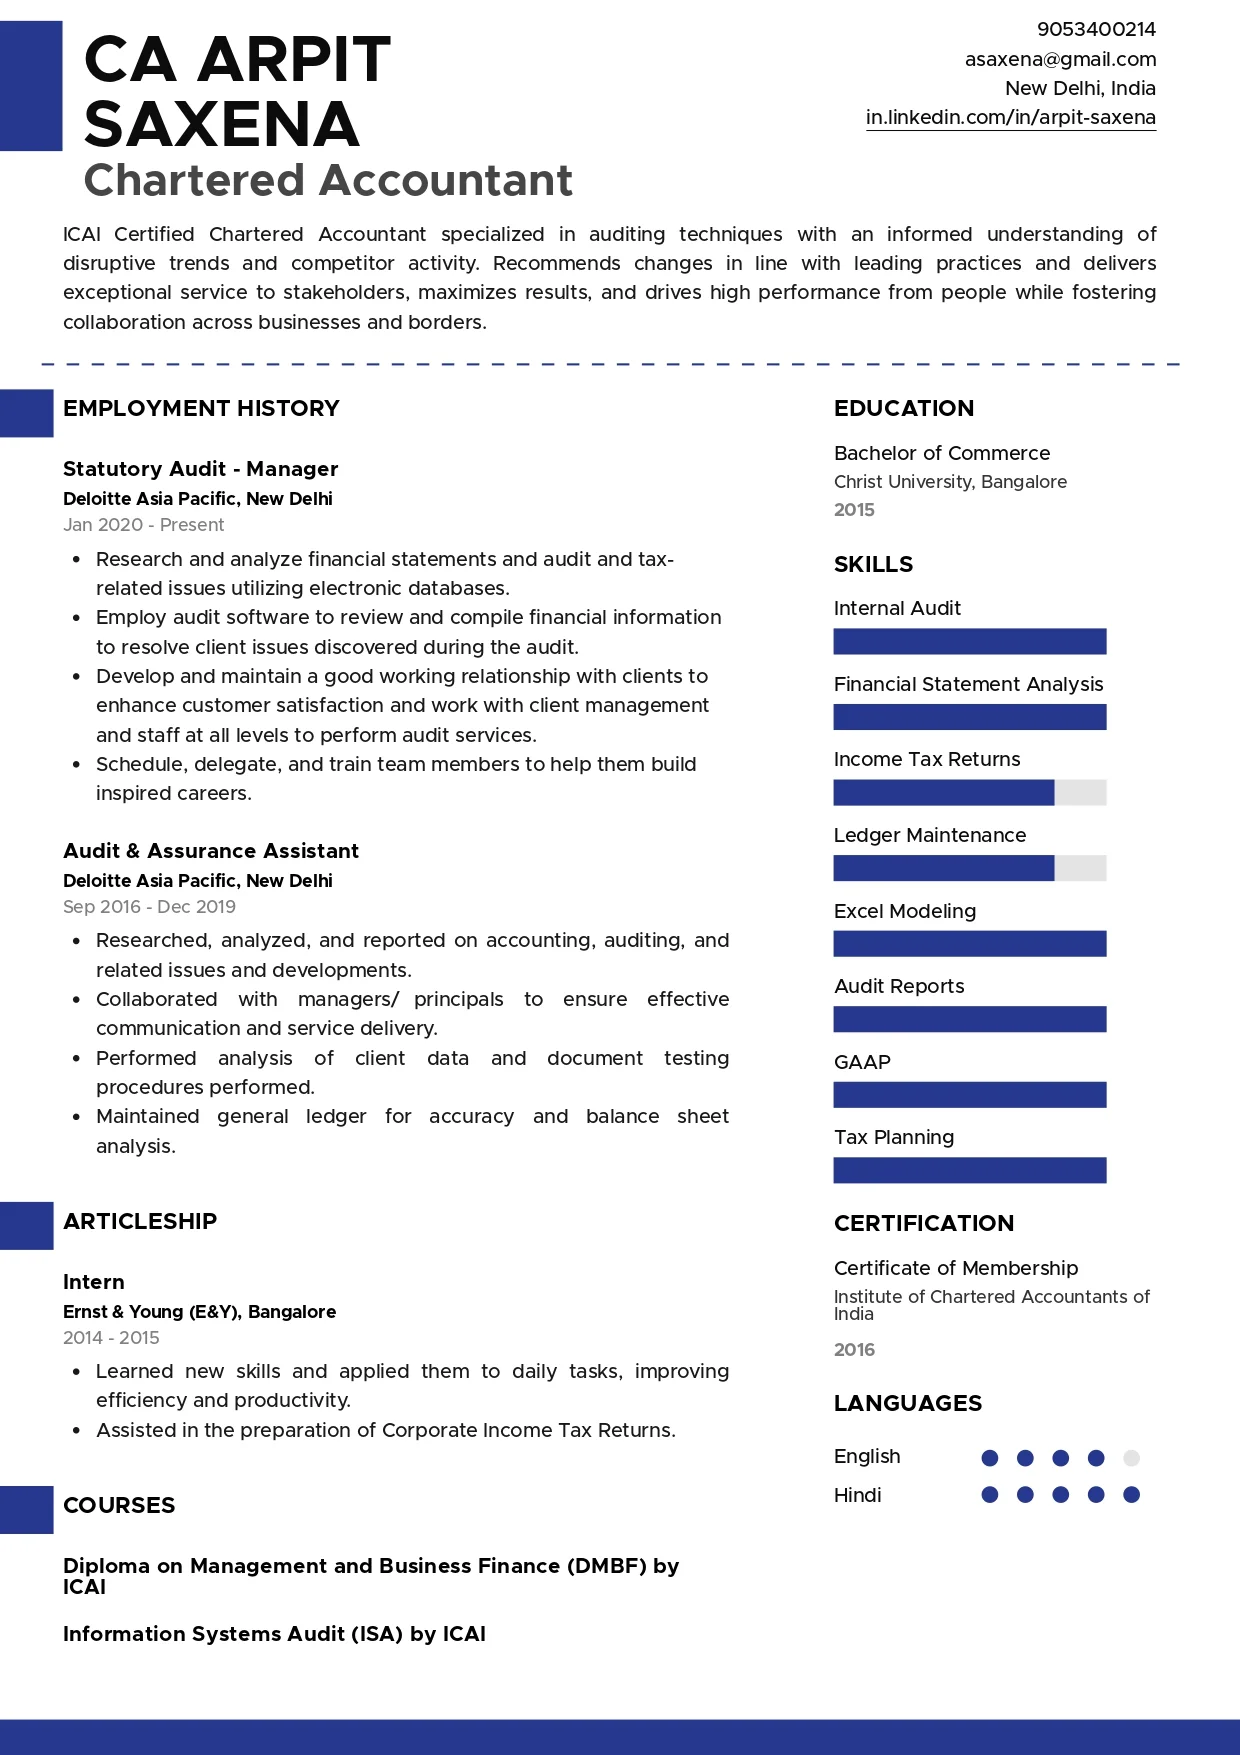 Sample Resume of Chartered Accountant (CA) | Free Resume Templates & Samples on Resumod.co